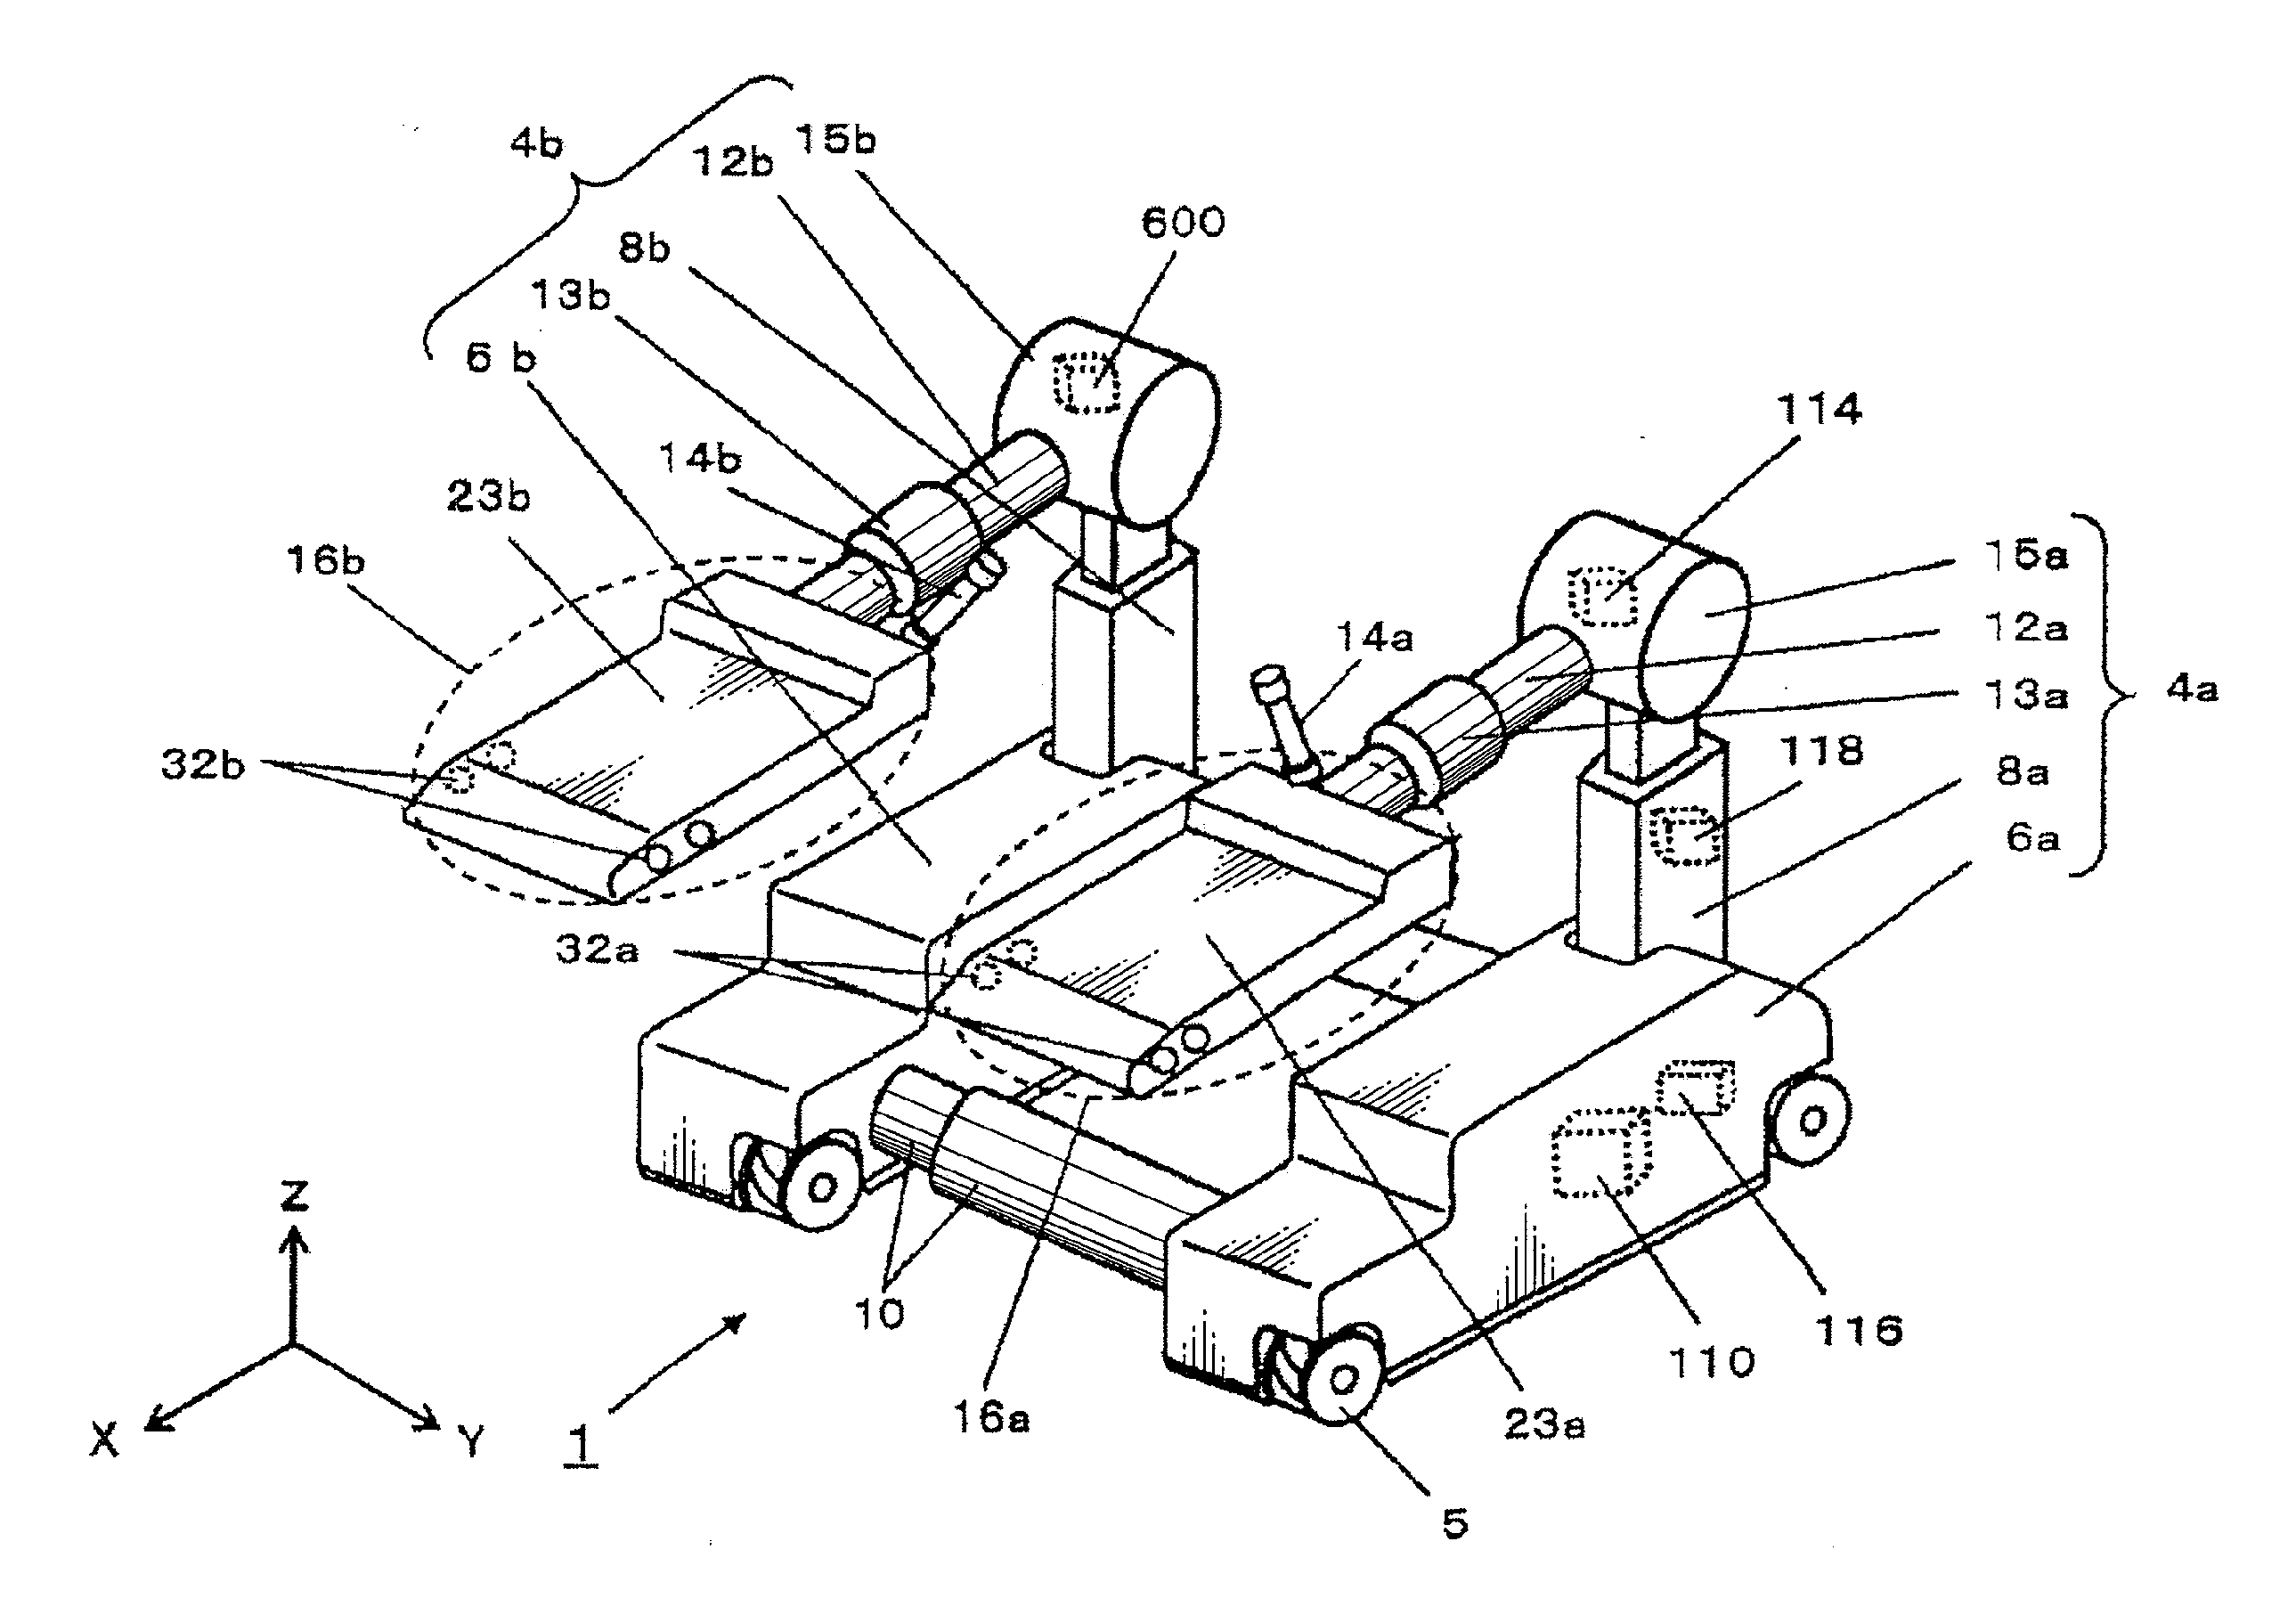 Transfer supporting apparatus